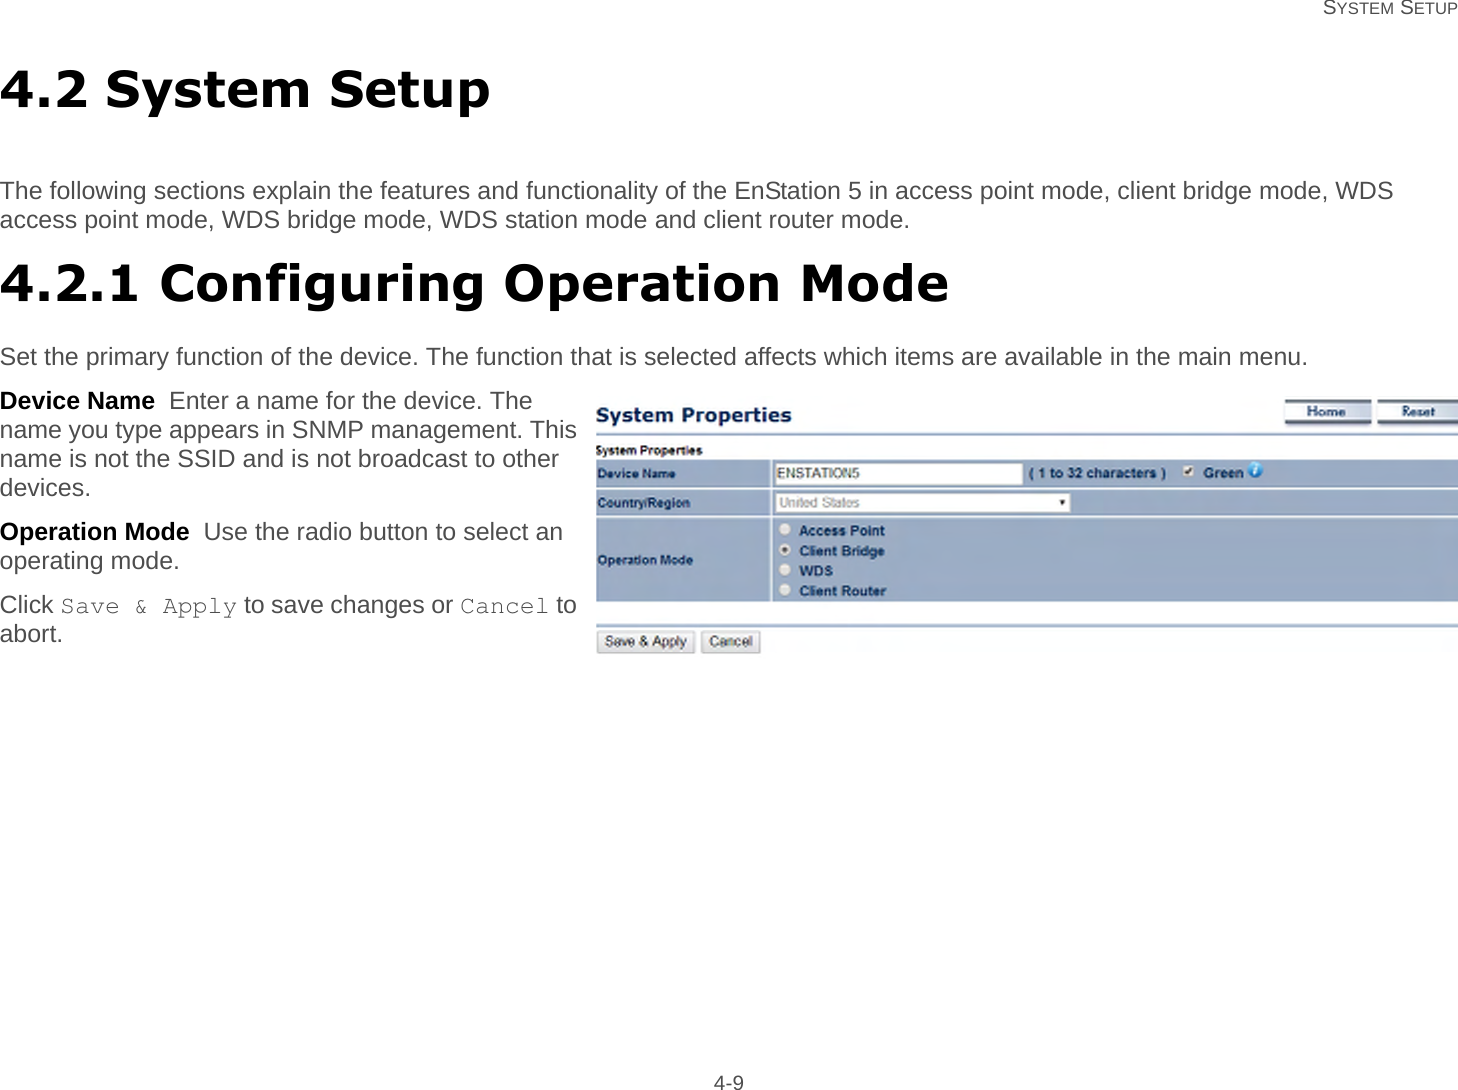   SYSTEM SETUP 4-94.2 System SetupThe following sections explain the features and functionality of the EnStation 5 in access point mode, client bridge mode, WDS access point mode, WDS bridge mode, WDS station mode and client router mode.4.2.1 Configuring Operation ModeSet the primary function of the device. The function that is selected affects which items are available in the main menu.Device Name  Enter a name for the device. The name you type appears in SNMP management. This name is not the SSID and is not broadcast to other devices.Operation Mode  Use the radio button to select an operating mode.Click Save &amp; Apply to save changes or Cancel to abort.